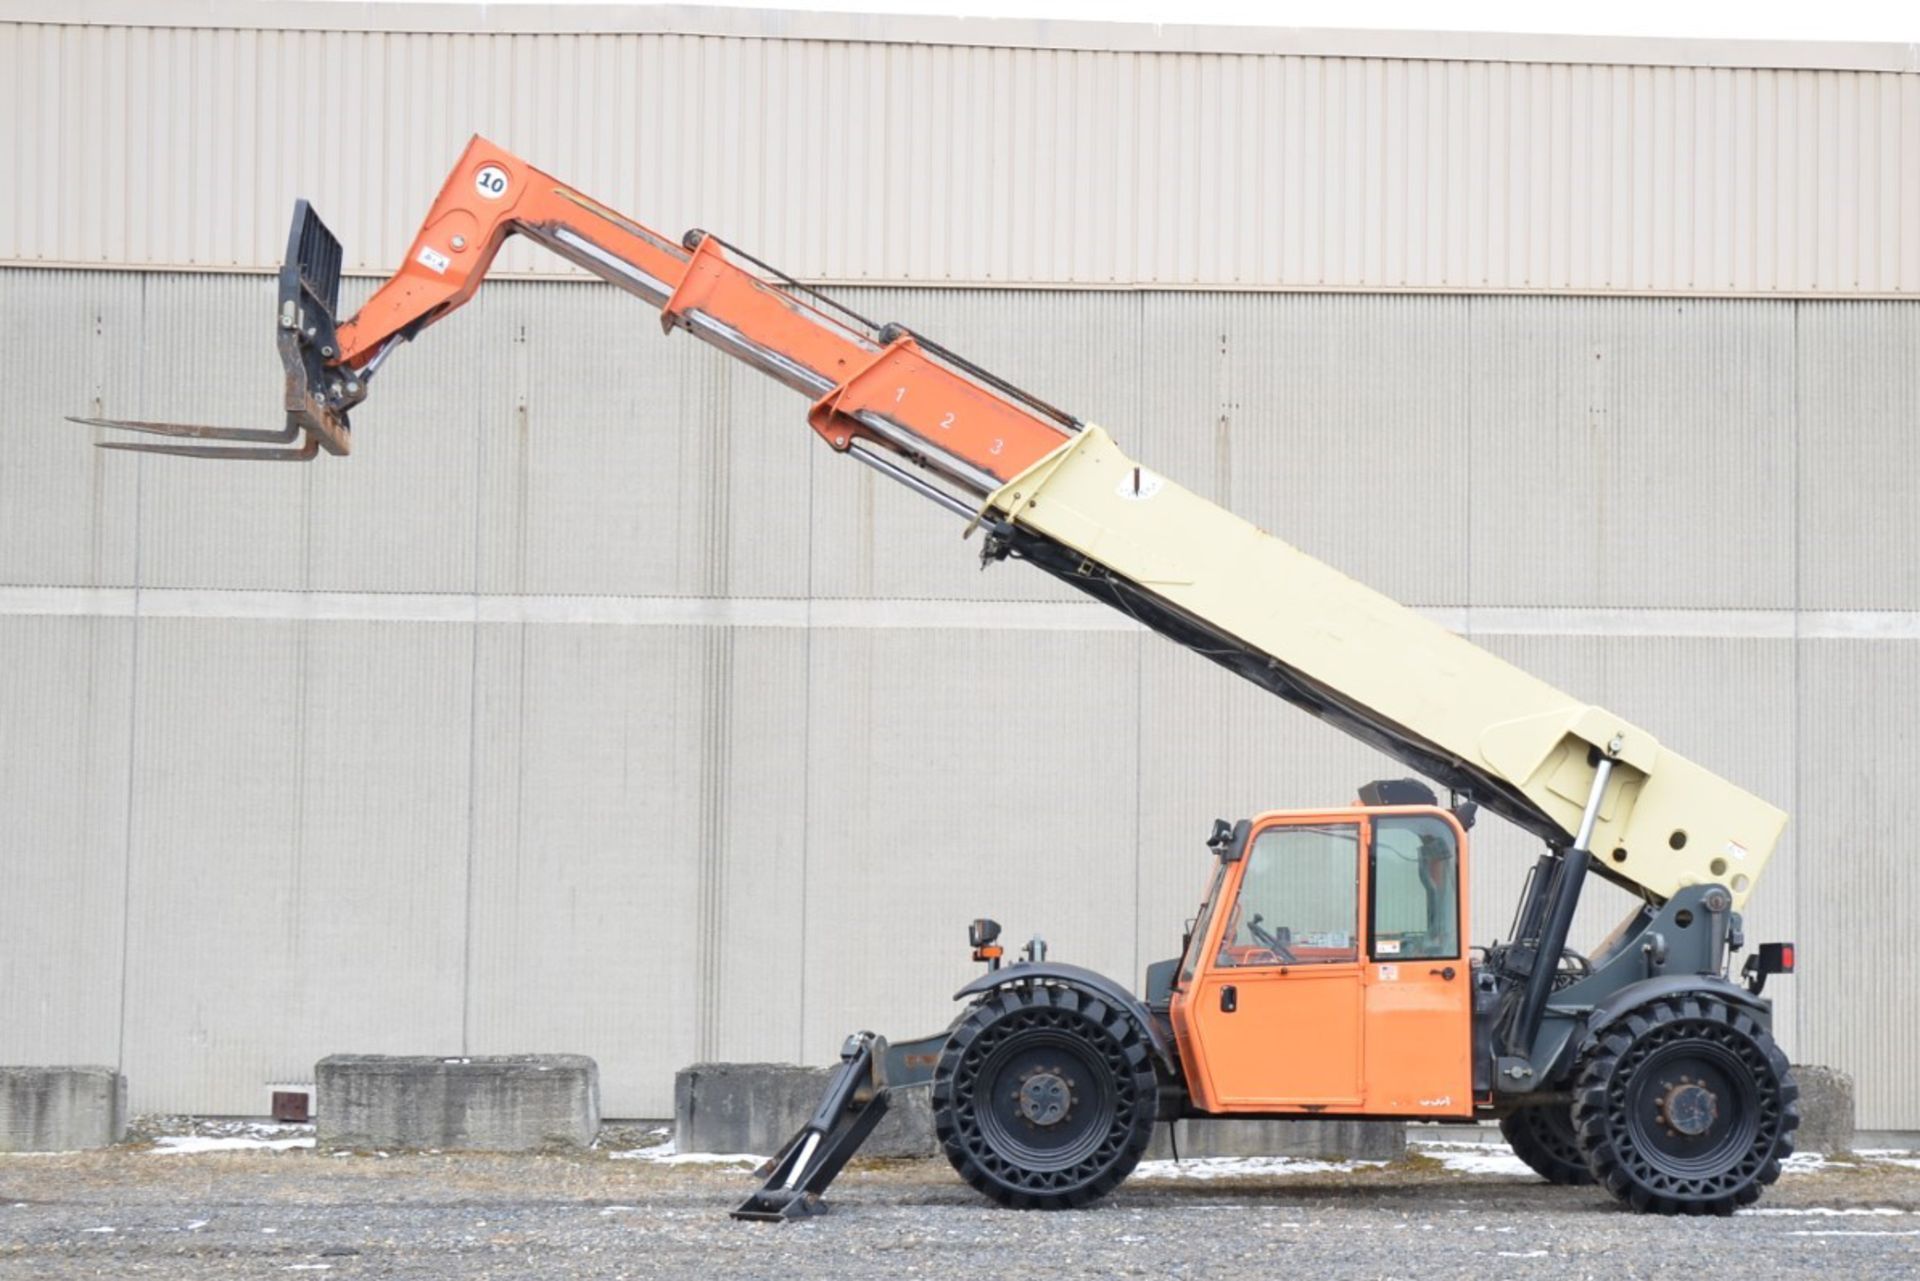 JLG (2011) G10-55A 10,000 LBS. CAPACITY DIESEL TELEHANDLER FORKLIFT WITH 56' MAX VERTICAL LIFT, - Image 14 of 23